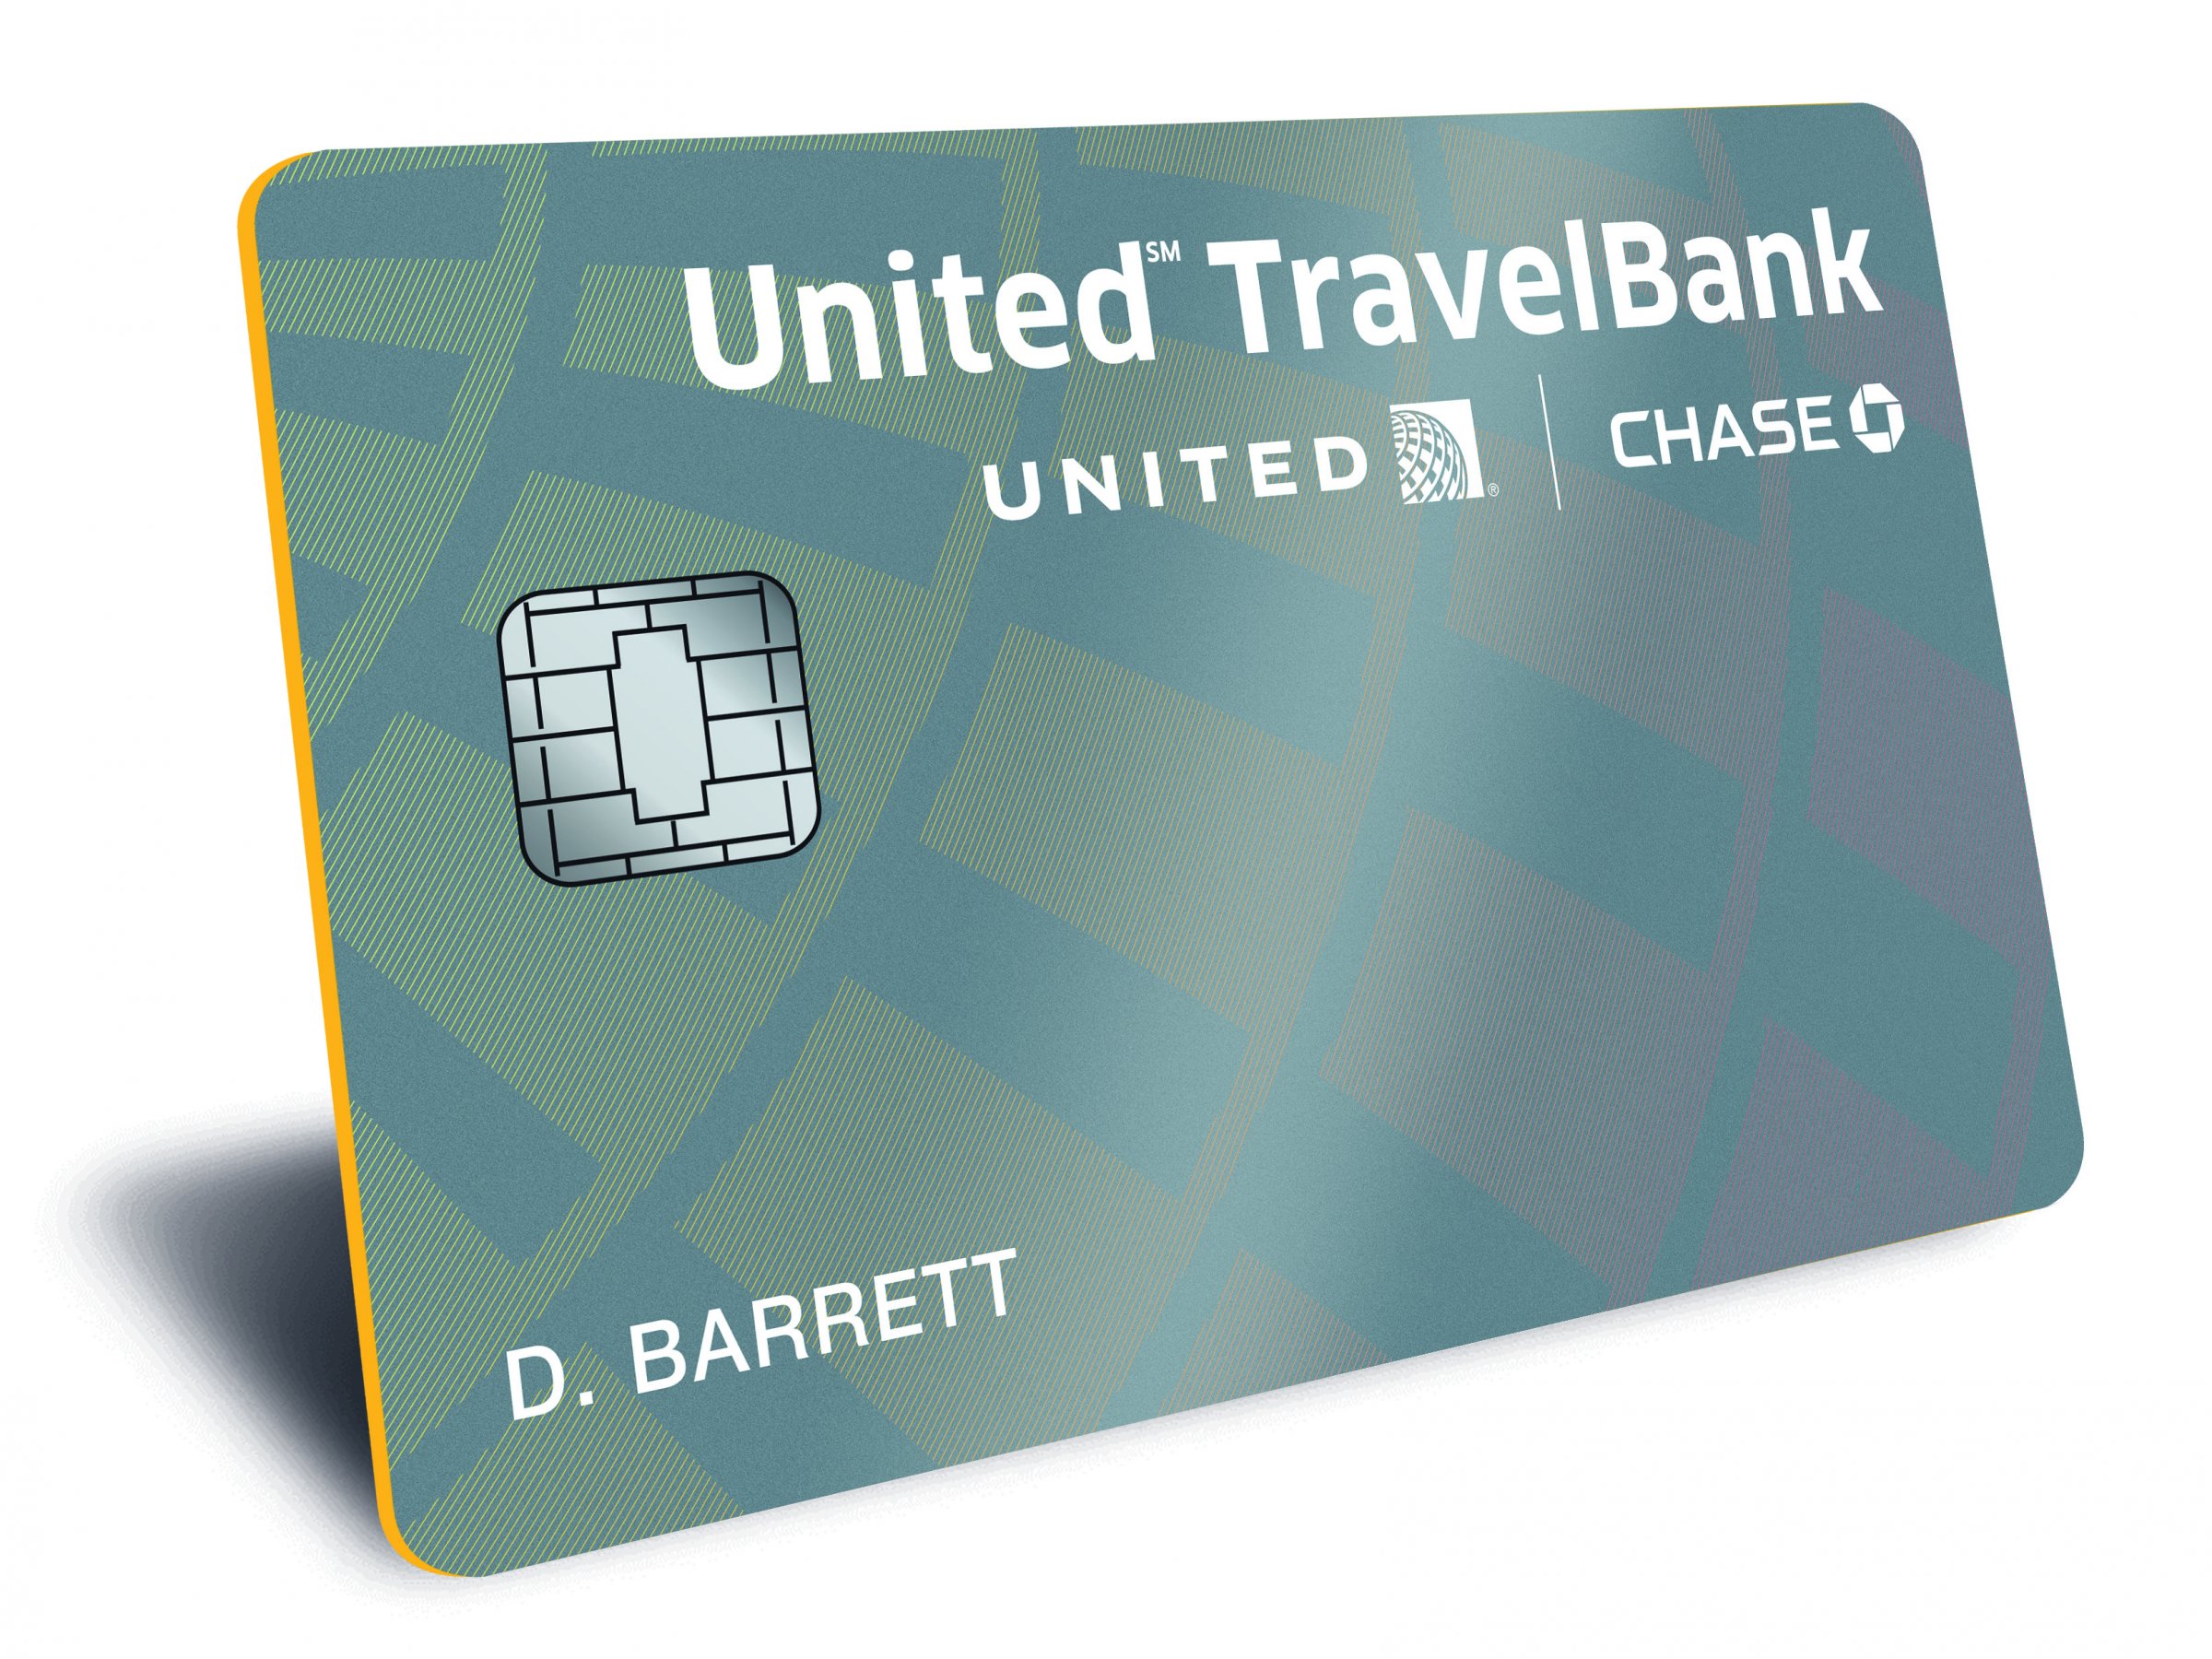 Chase Launches New No Annual Fee United Travelbank Card